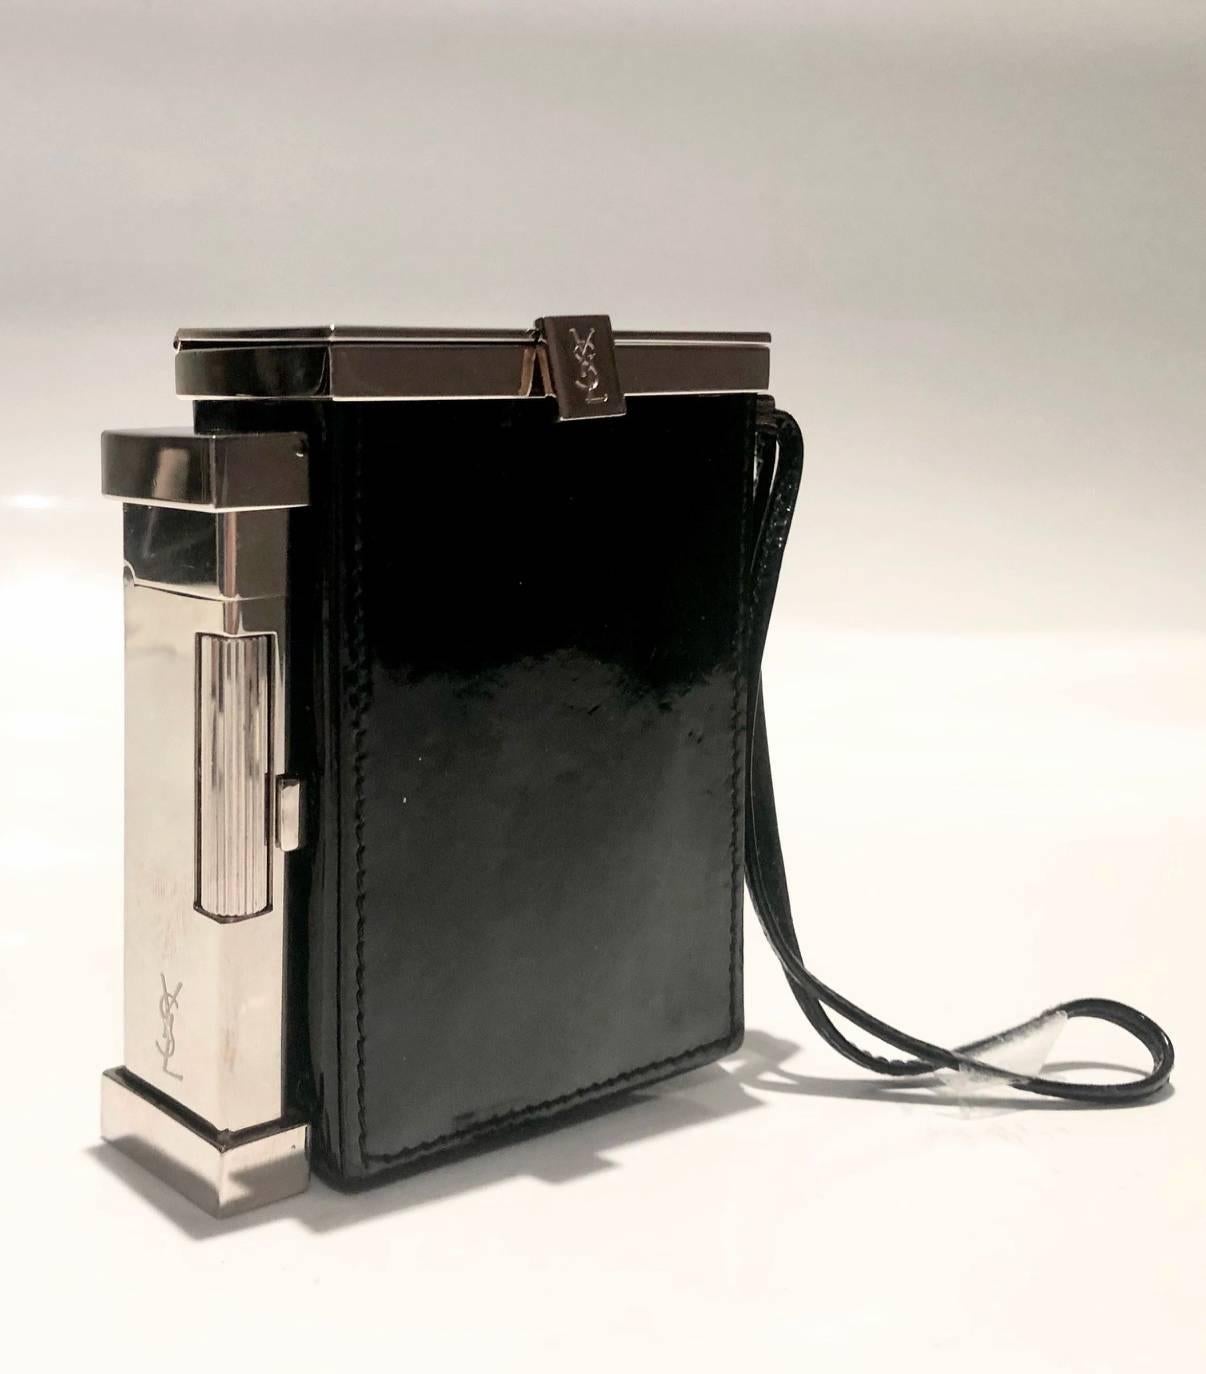 Amazing vintage smoking box and purse from Yves Saint Laurent designed by Tom Ford in the late 90s/early 00s. Silver tone metal ware, black patent leather, clutch closure with logo details, silver tine metal lighter with signature on, black patent